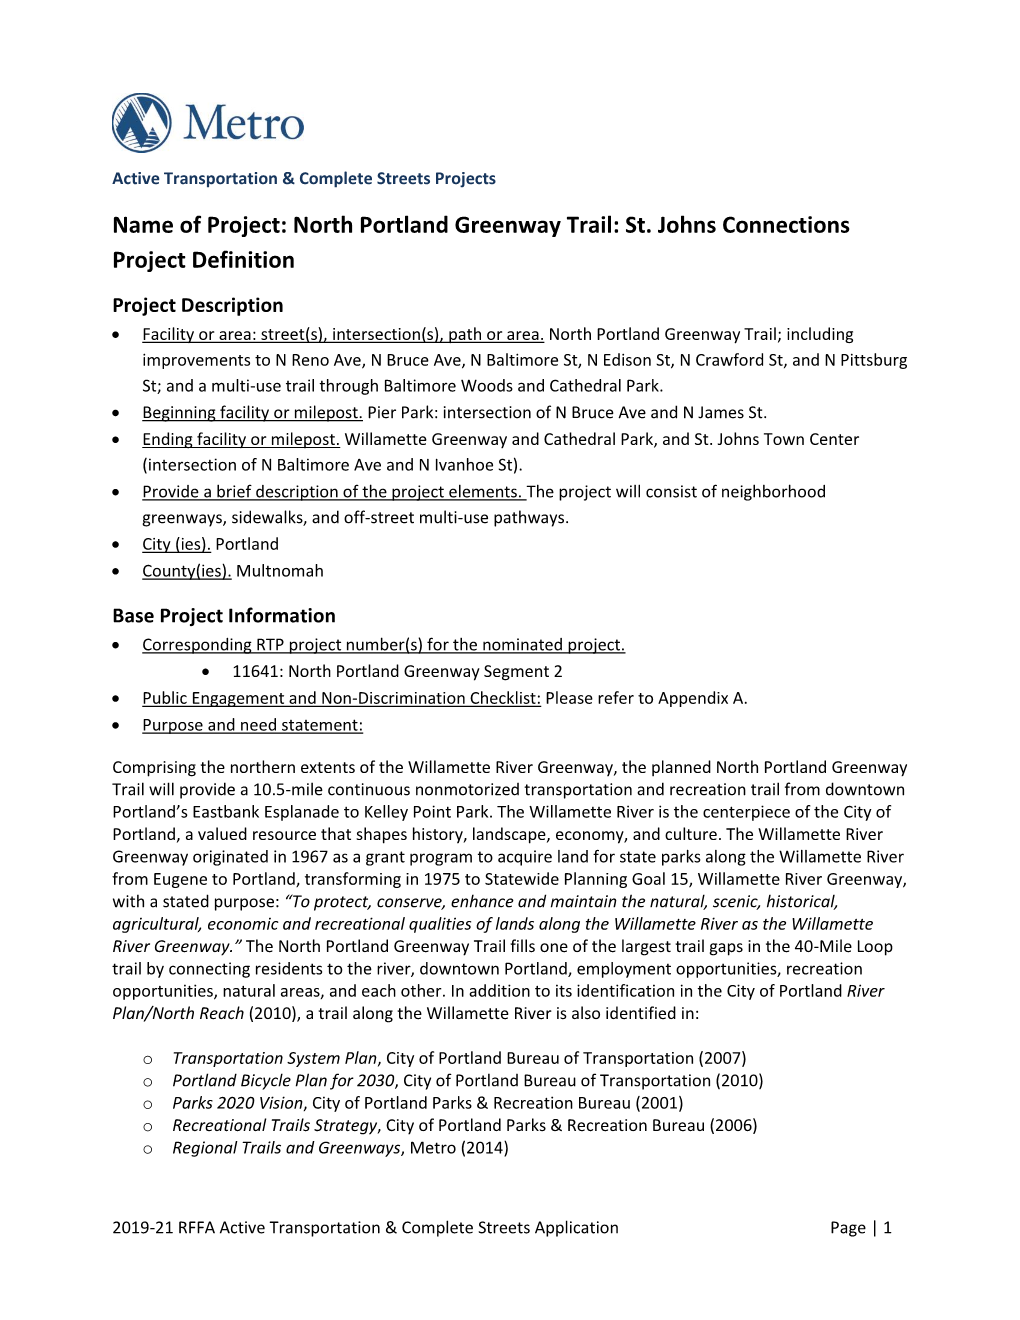 North Portland Greenway Trail: St. Johns Connections Project Definition